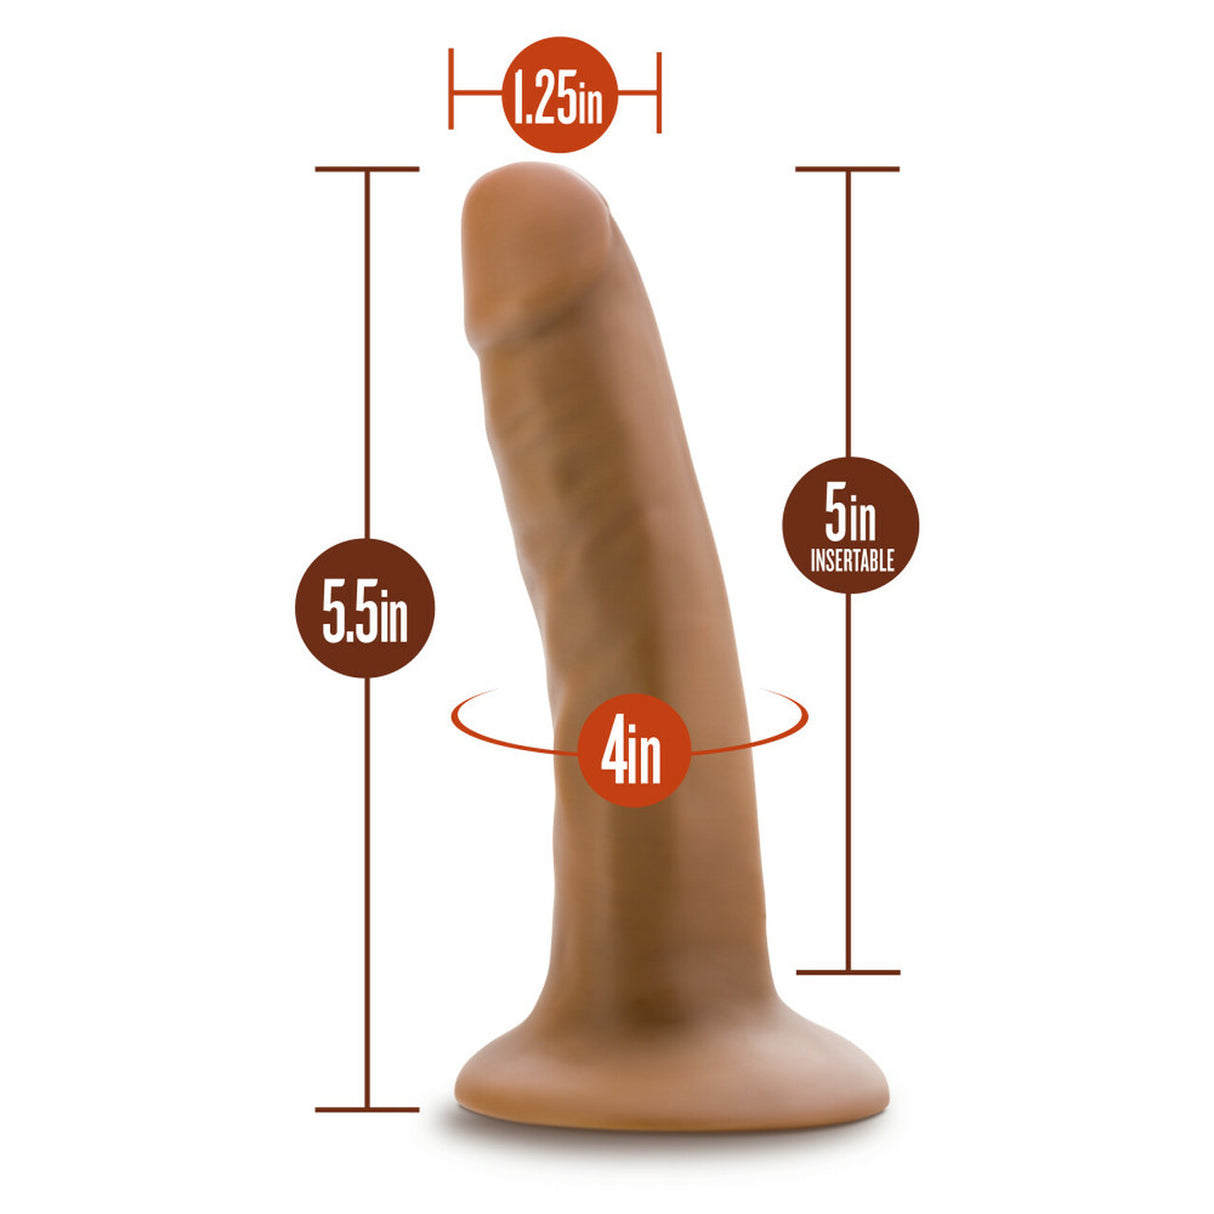 Dr Skin Silicone Dr Lucas 5in Dildo Mocha Intimates Adult Boutique